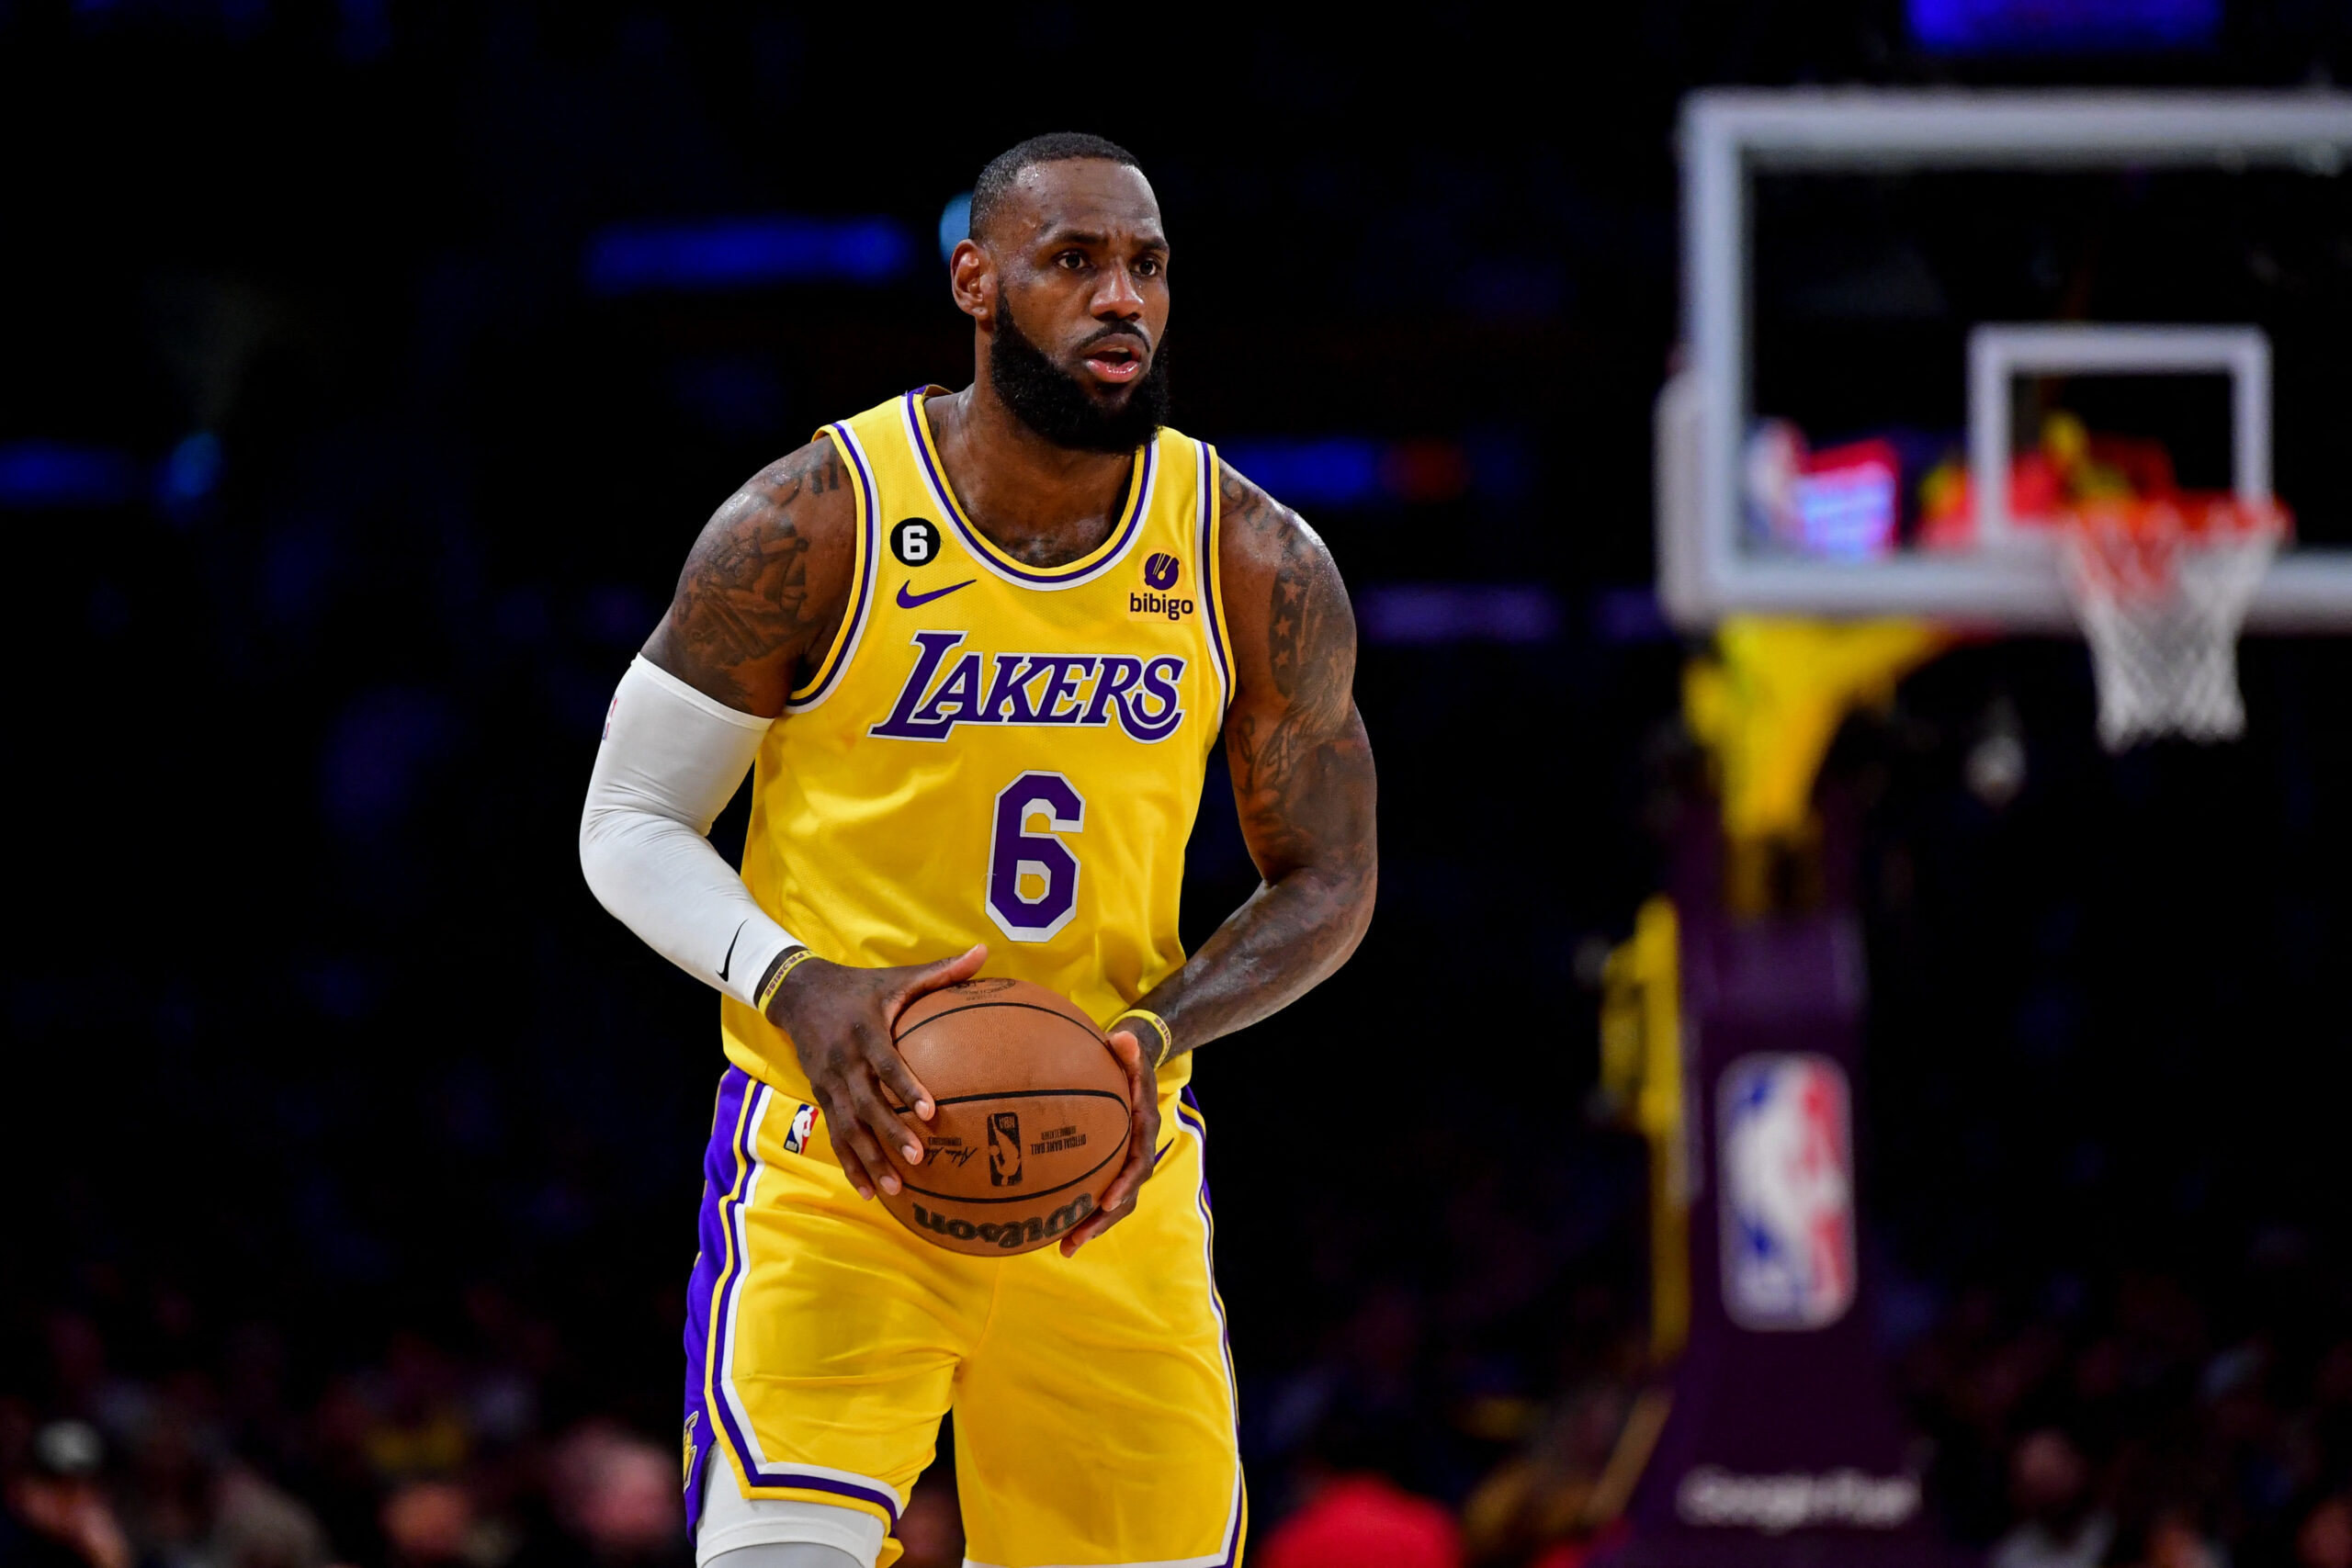 NBA Trade Proposal: LeBron James and the Lakers could acquire James Harden by offering these Stars in a blockbuster deal